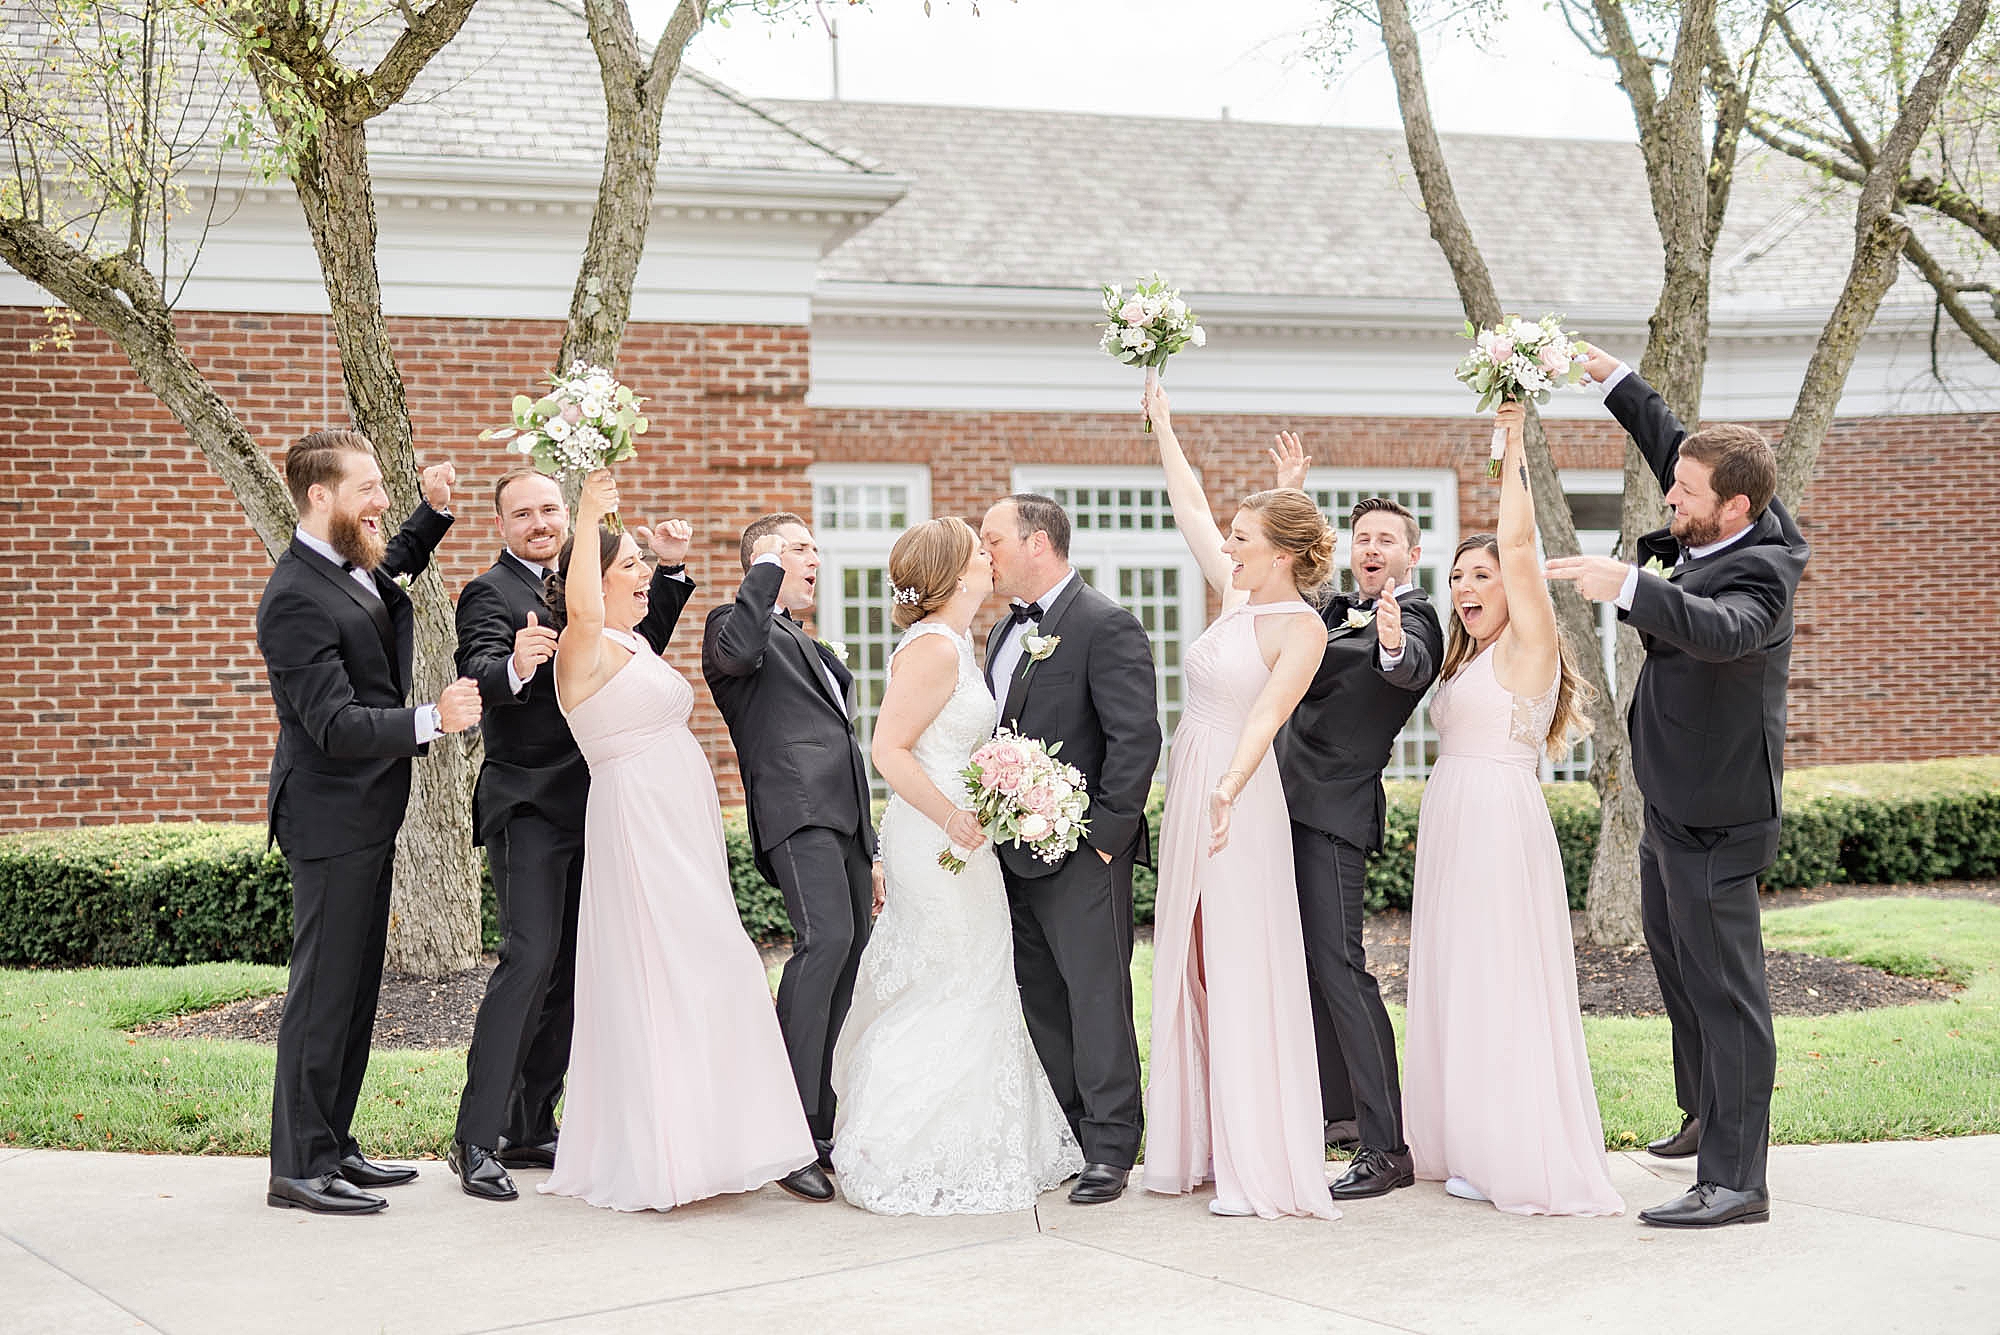 bridesmaids and groomsmen cheer while bride and groom kiss